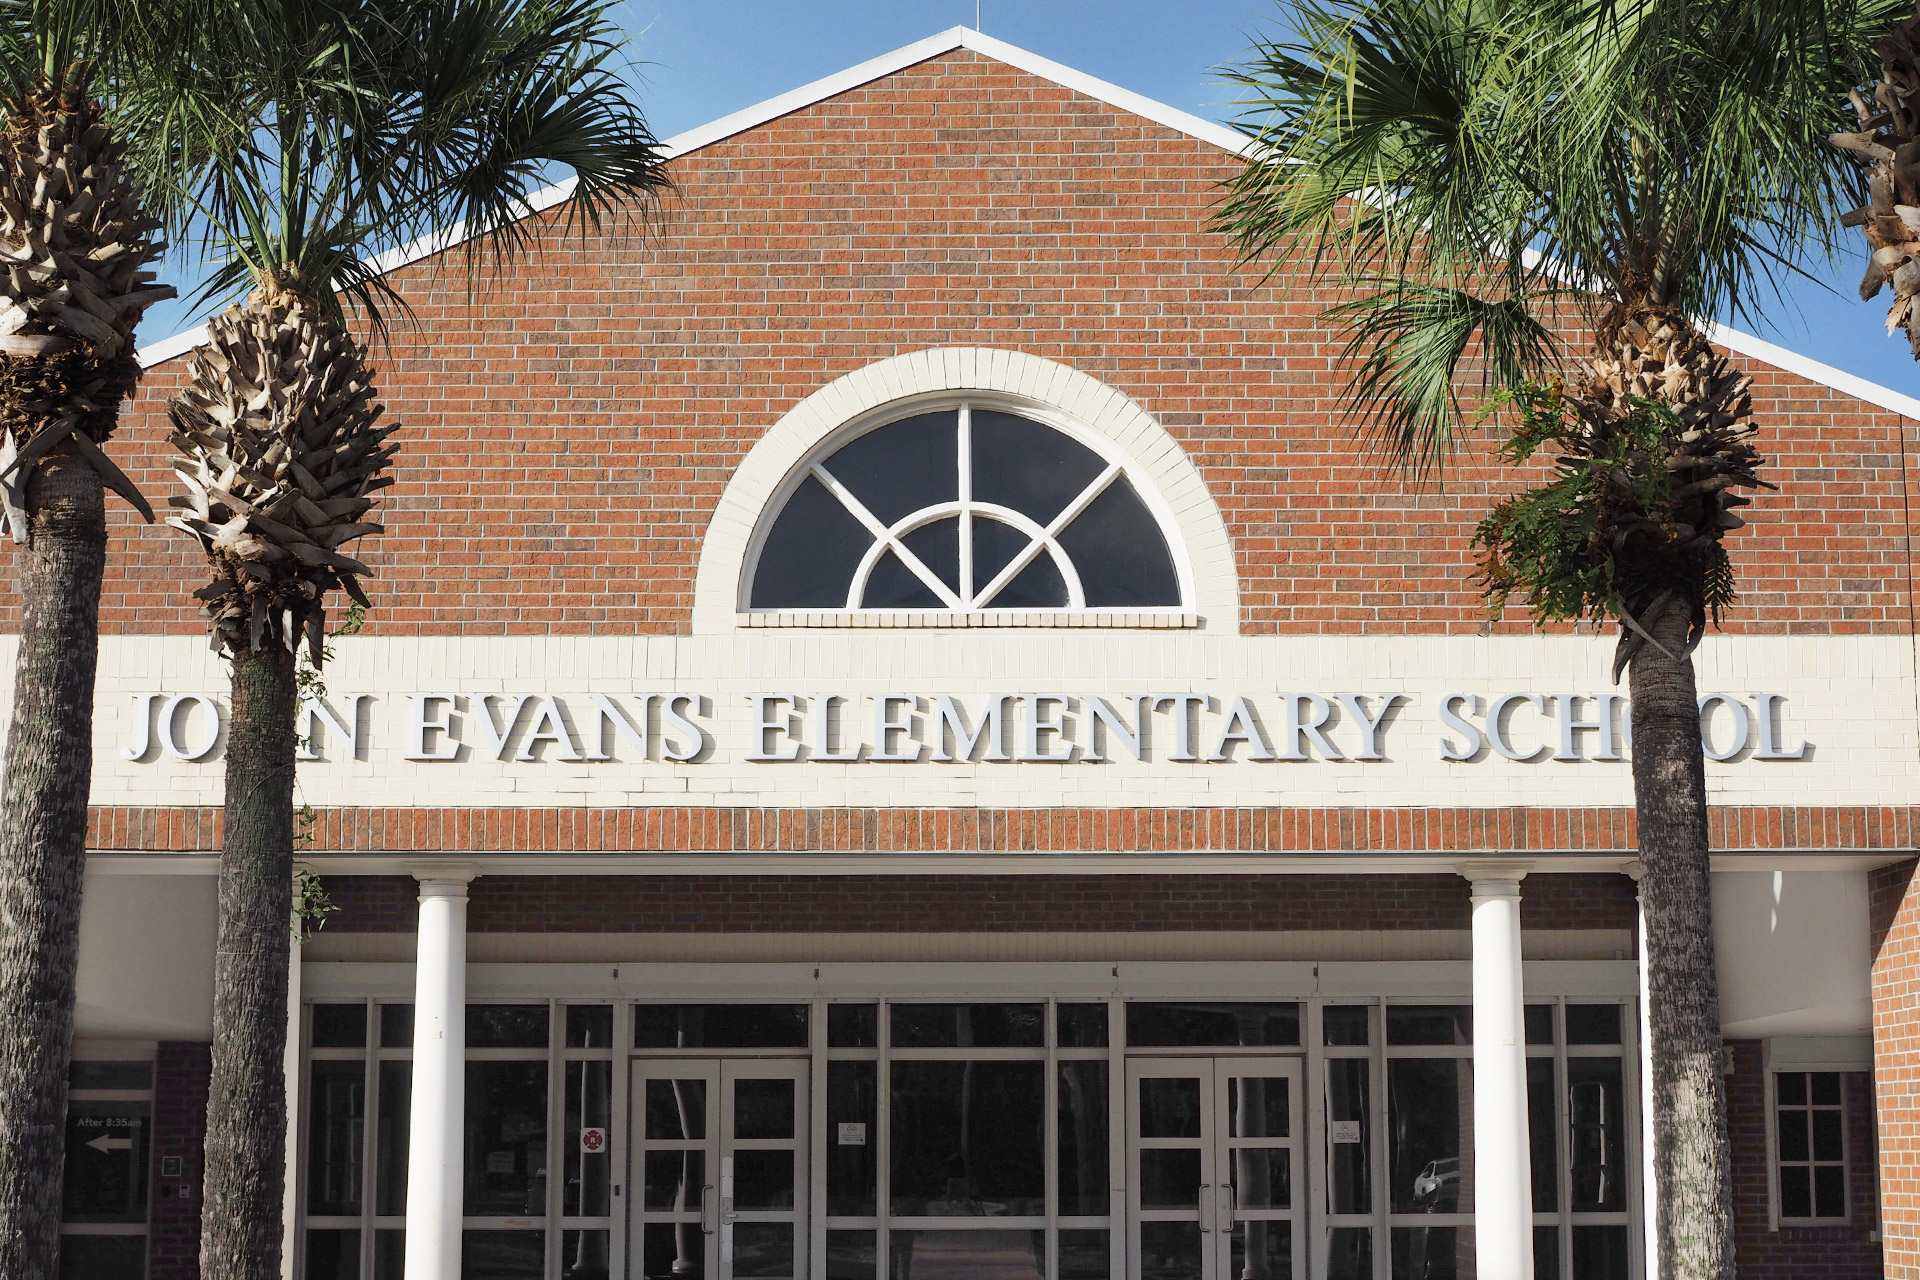 Entrance of Evans Elementary School framed by four palm trees.